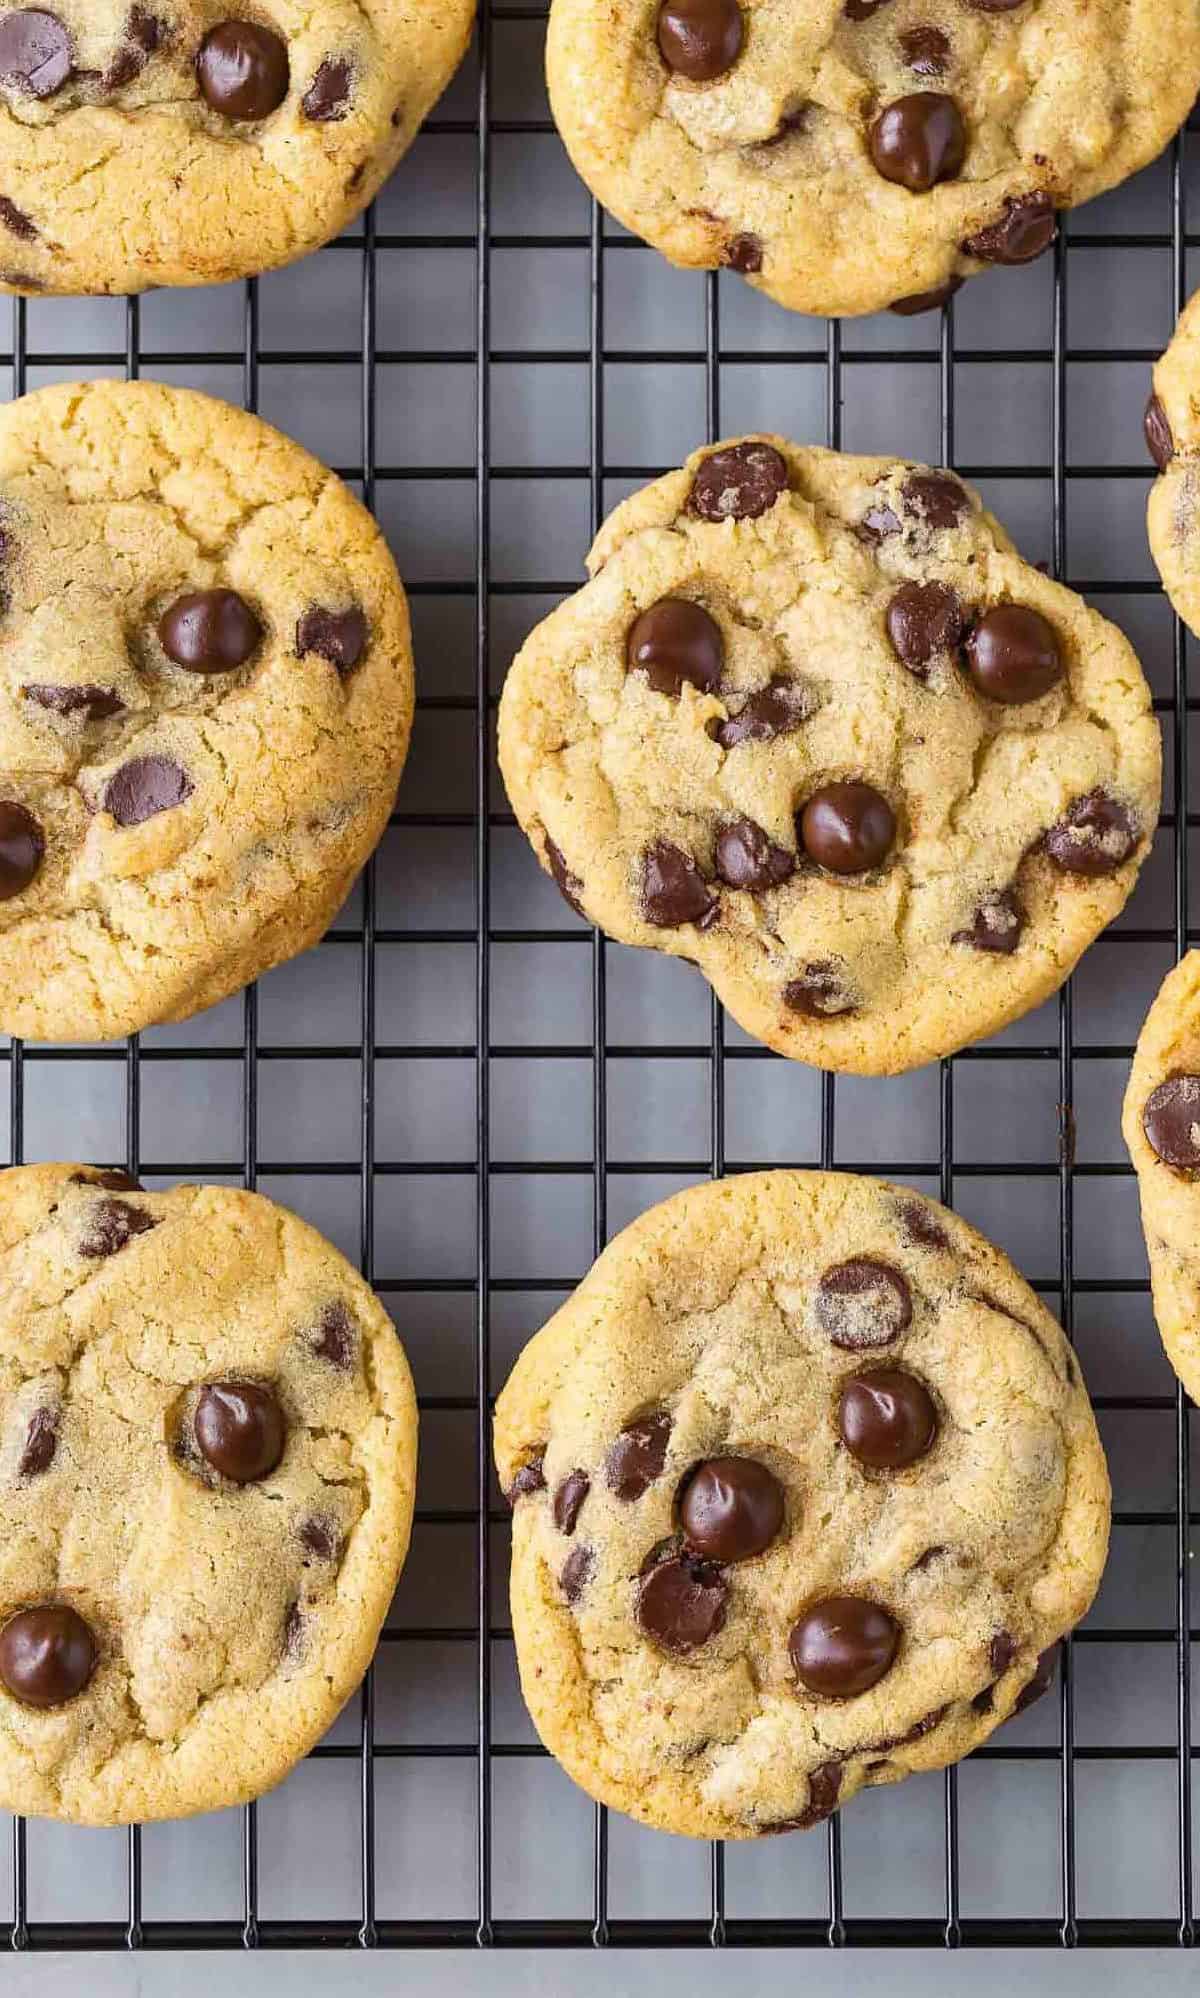  The key to a delicious cookie is in the batter - and this one is no exception!